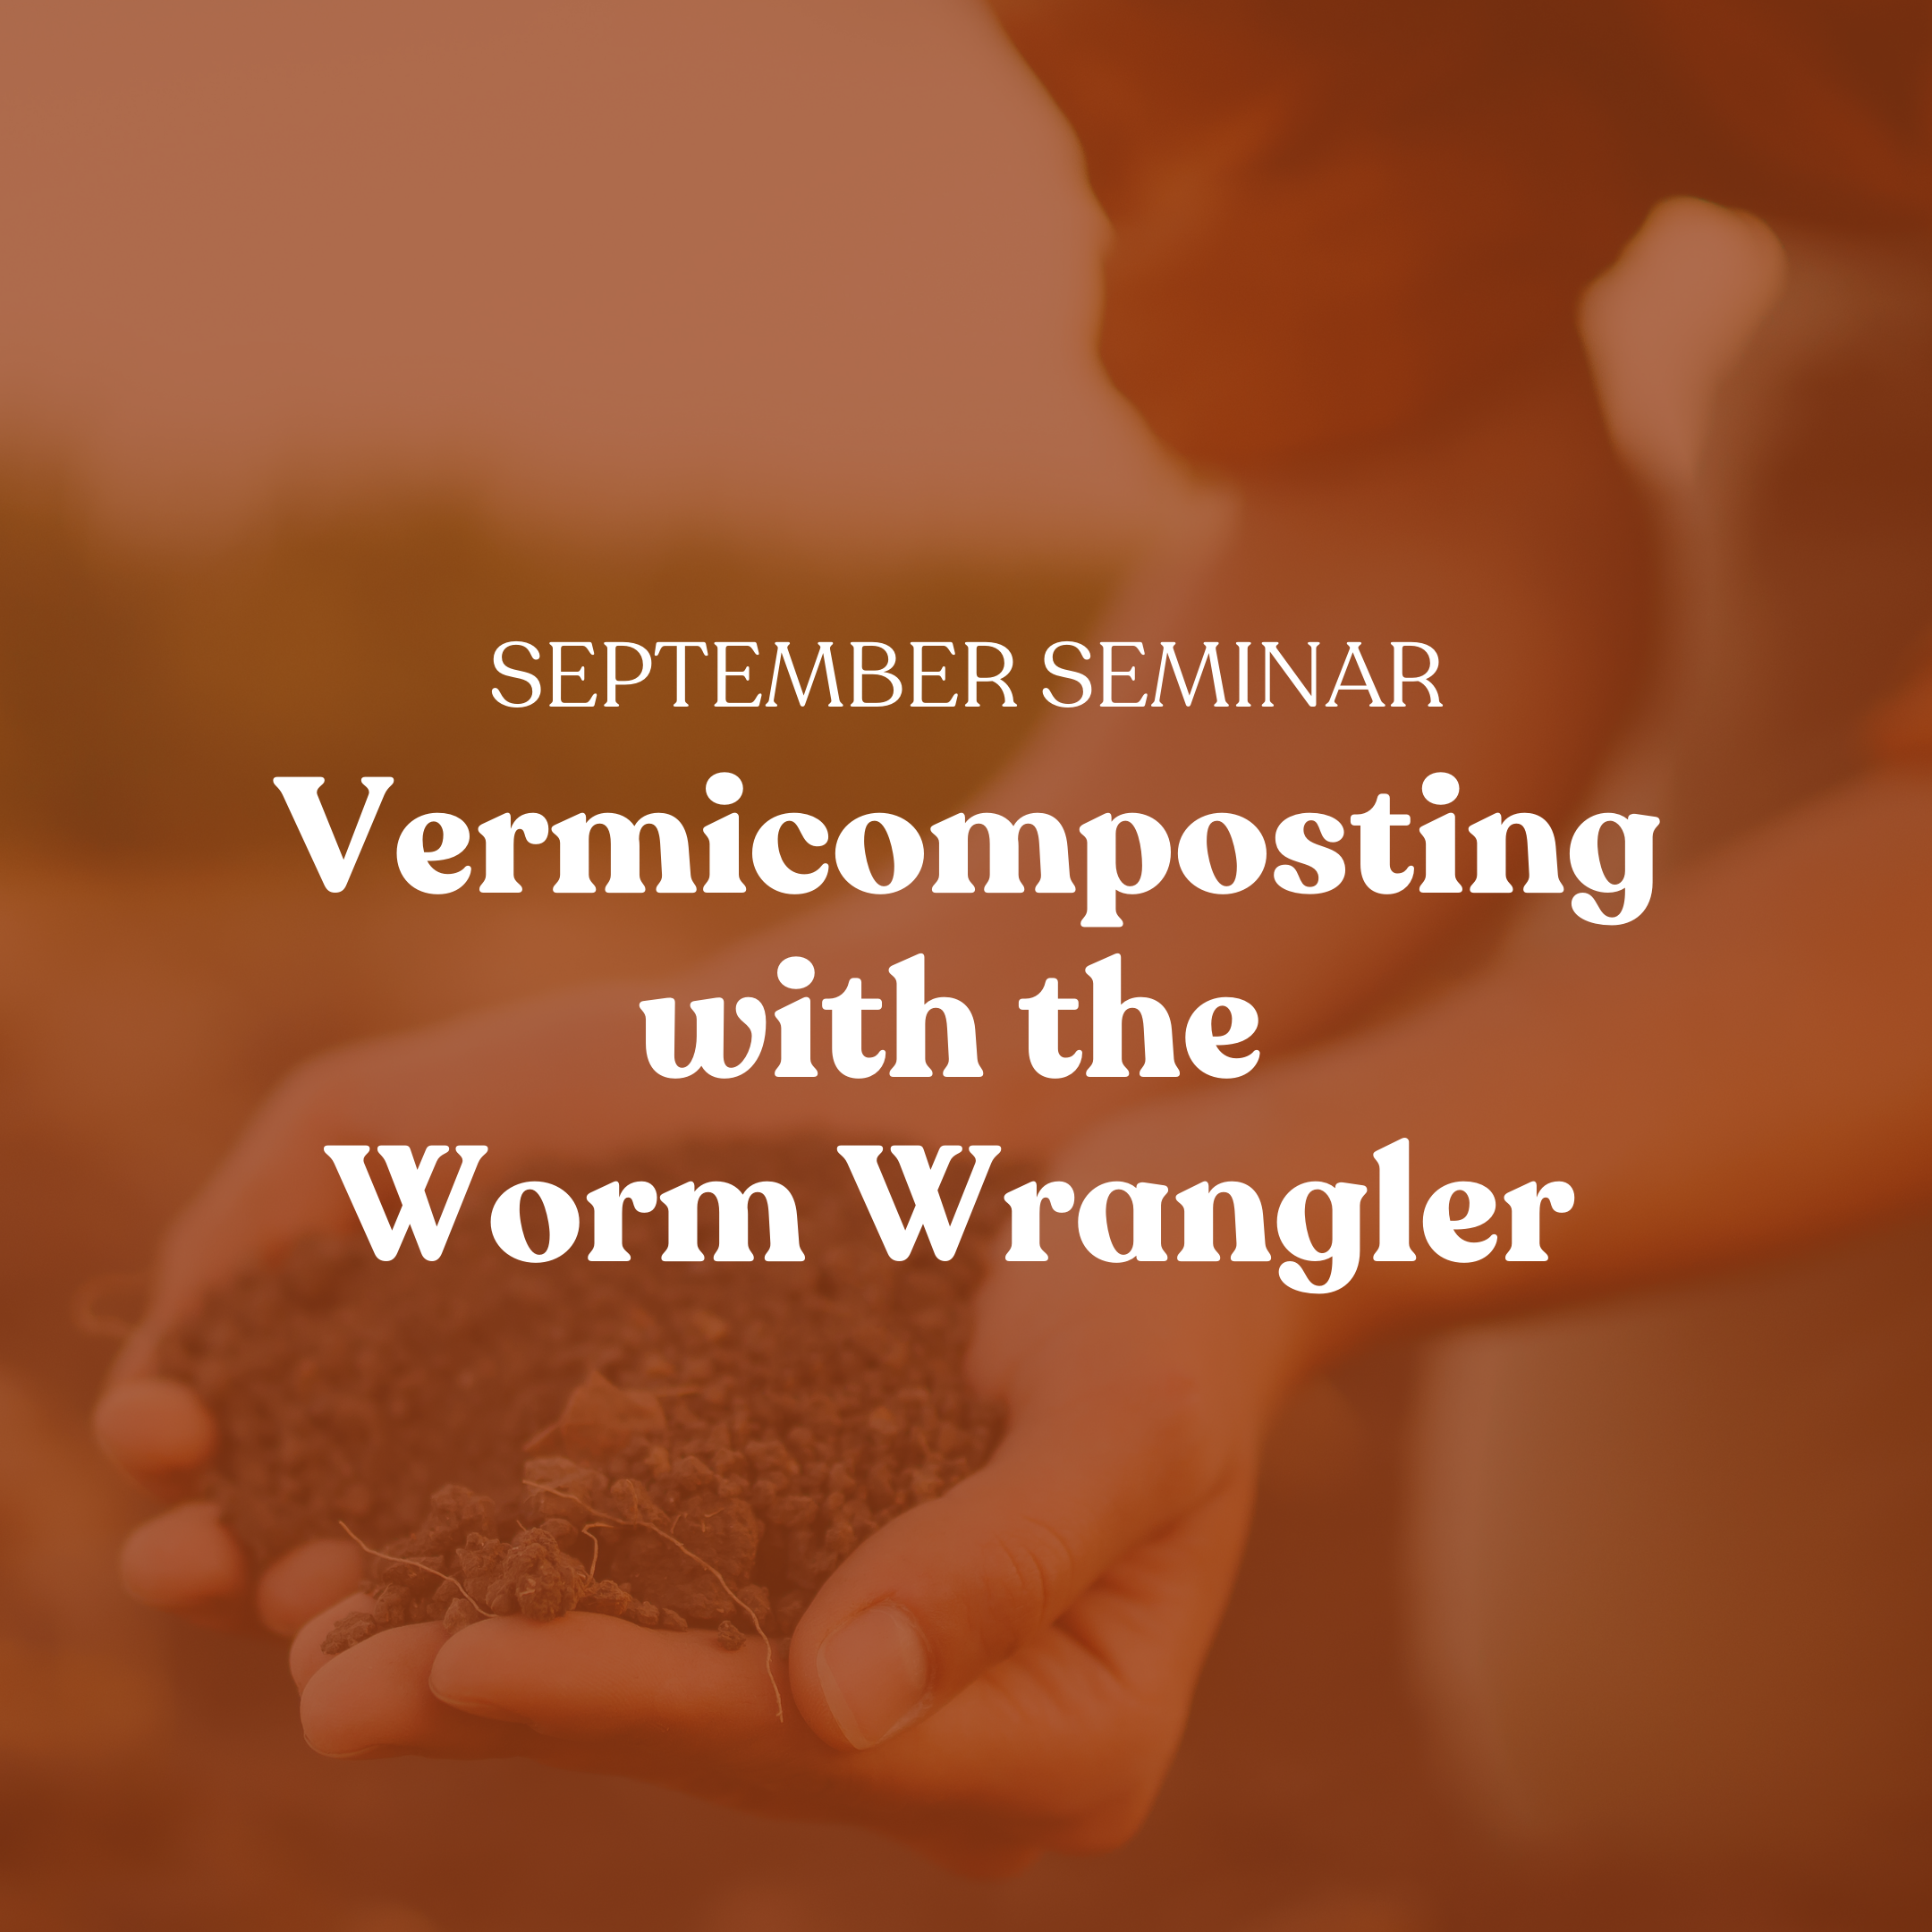 September Seminar: Vermicomposting with the Worm Wrangler hosted by gardenKitchener